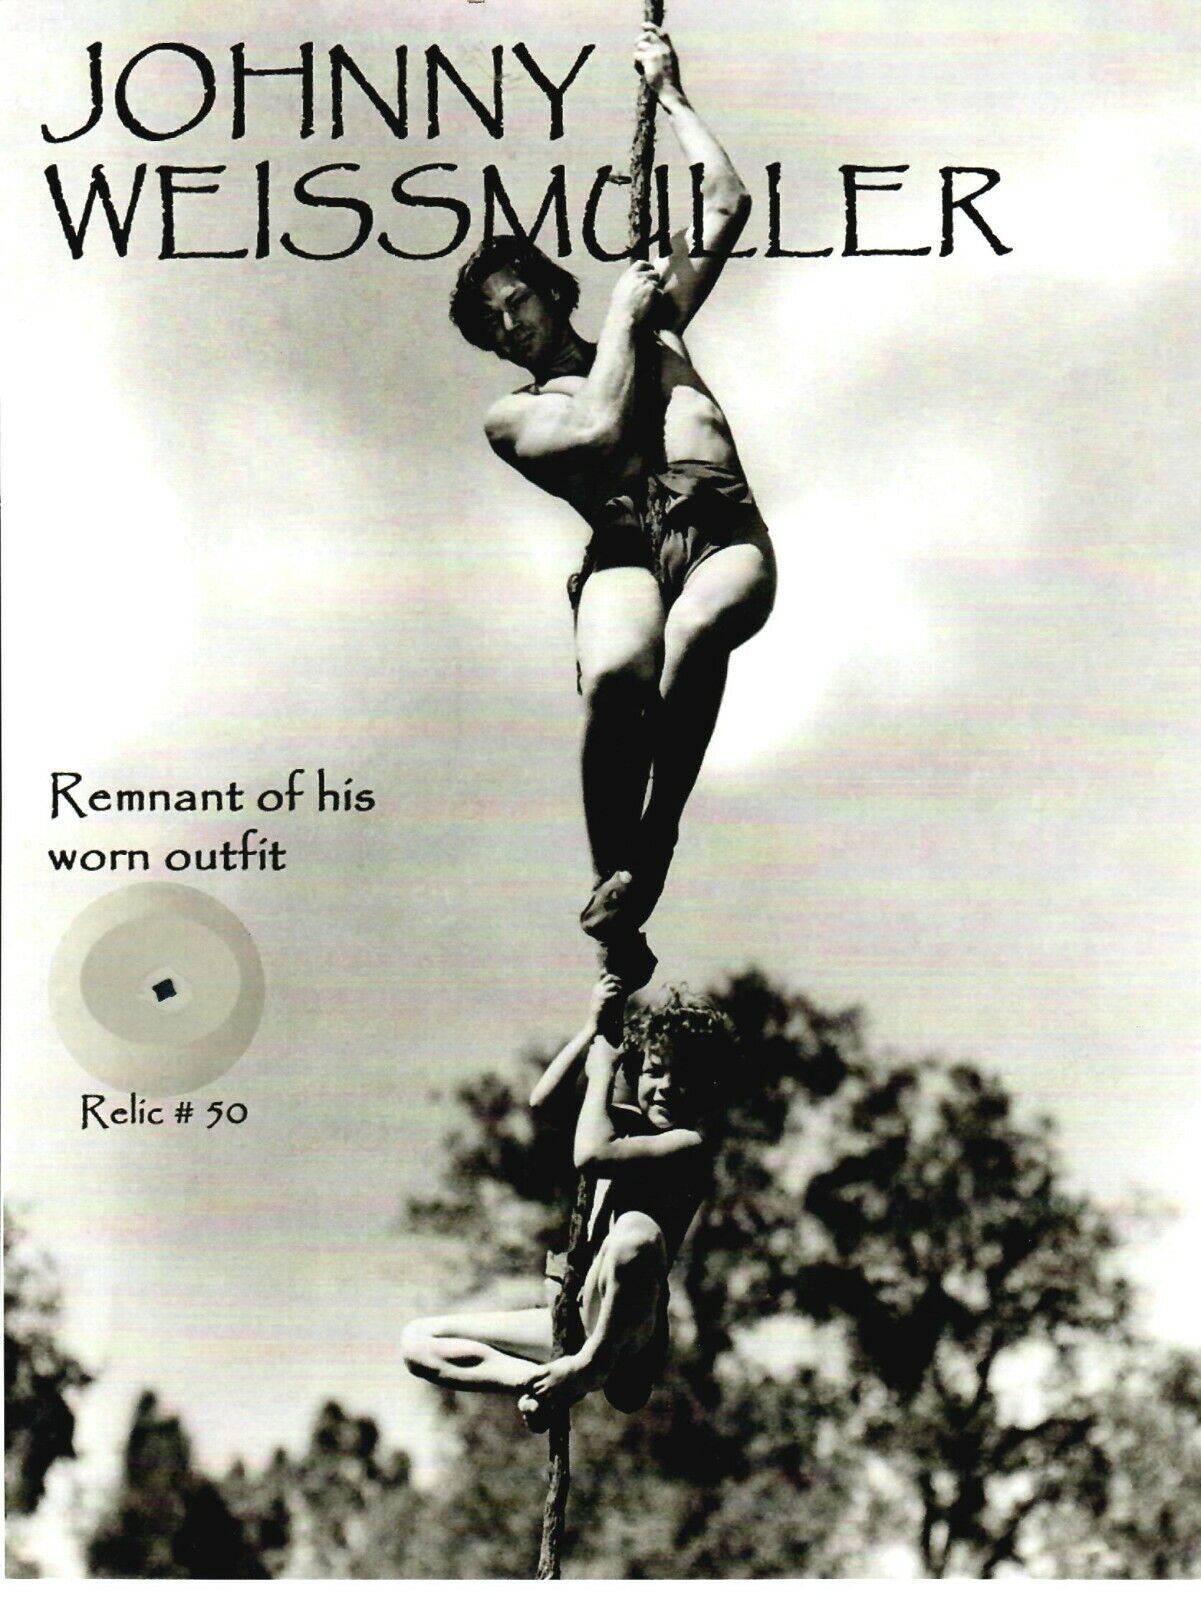 RARE “Johnny Weissmuller” Remnant of His Worn Outfit Encapsulated COA